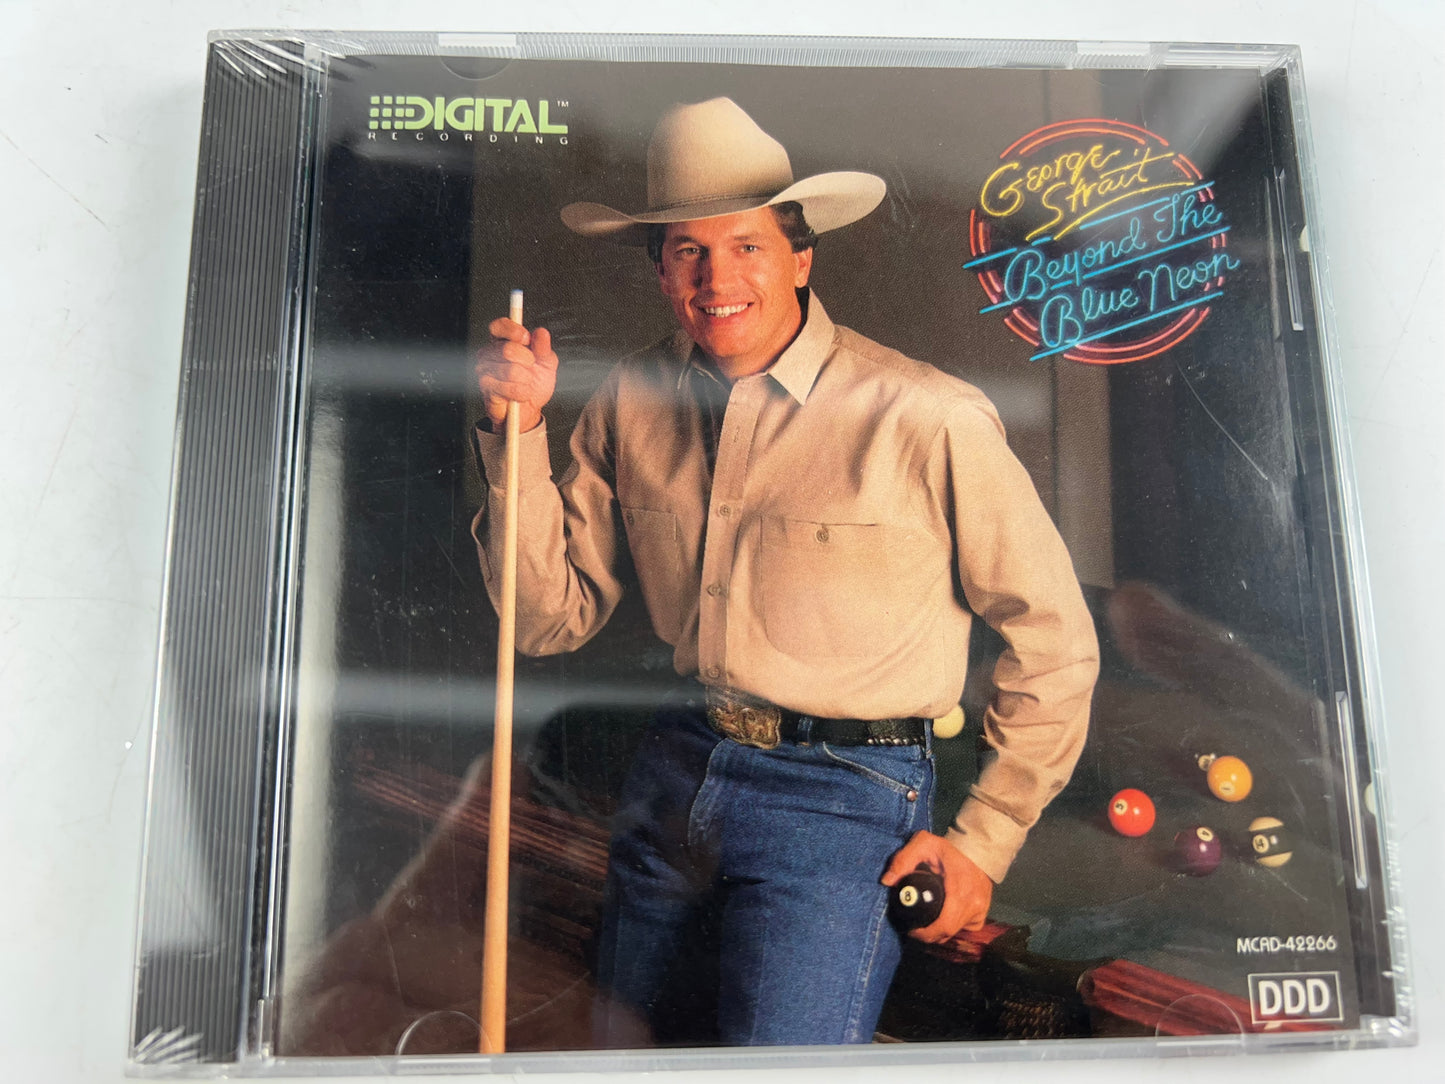 Beyond the Blue Neon by George Strait (CD, Feb-2003, MCA)